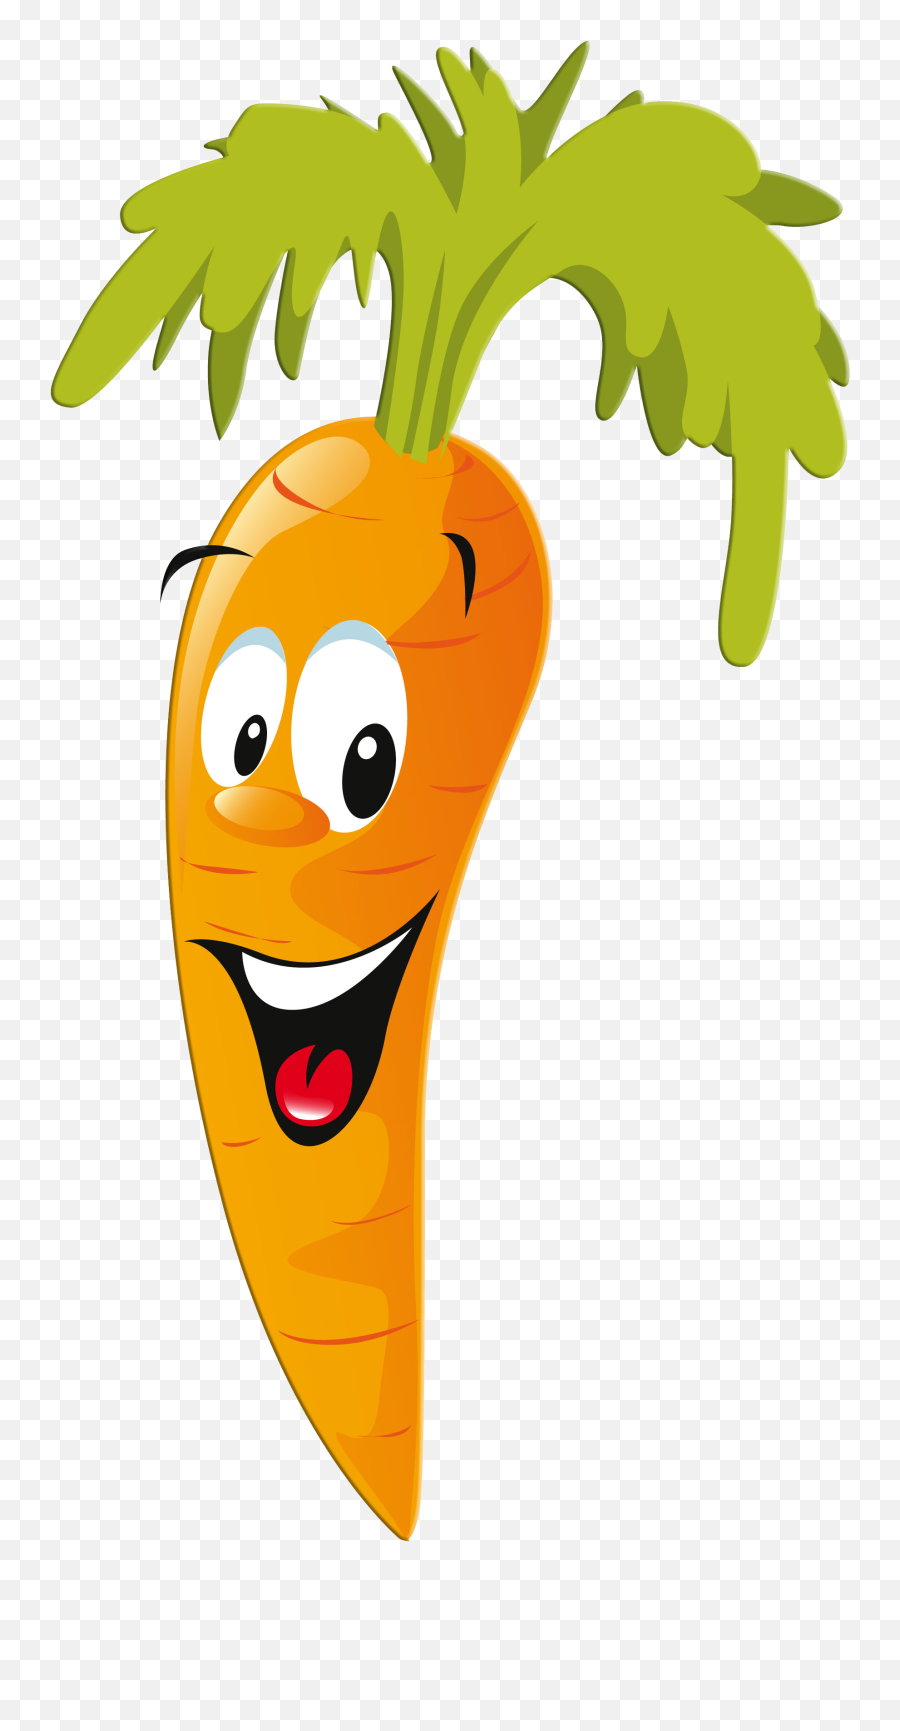 Happy And Smiling Carrot Clipart Fruit Cartoon Giraffe - Cartoon Carrot Clipart Emoji,Hand Clipart